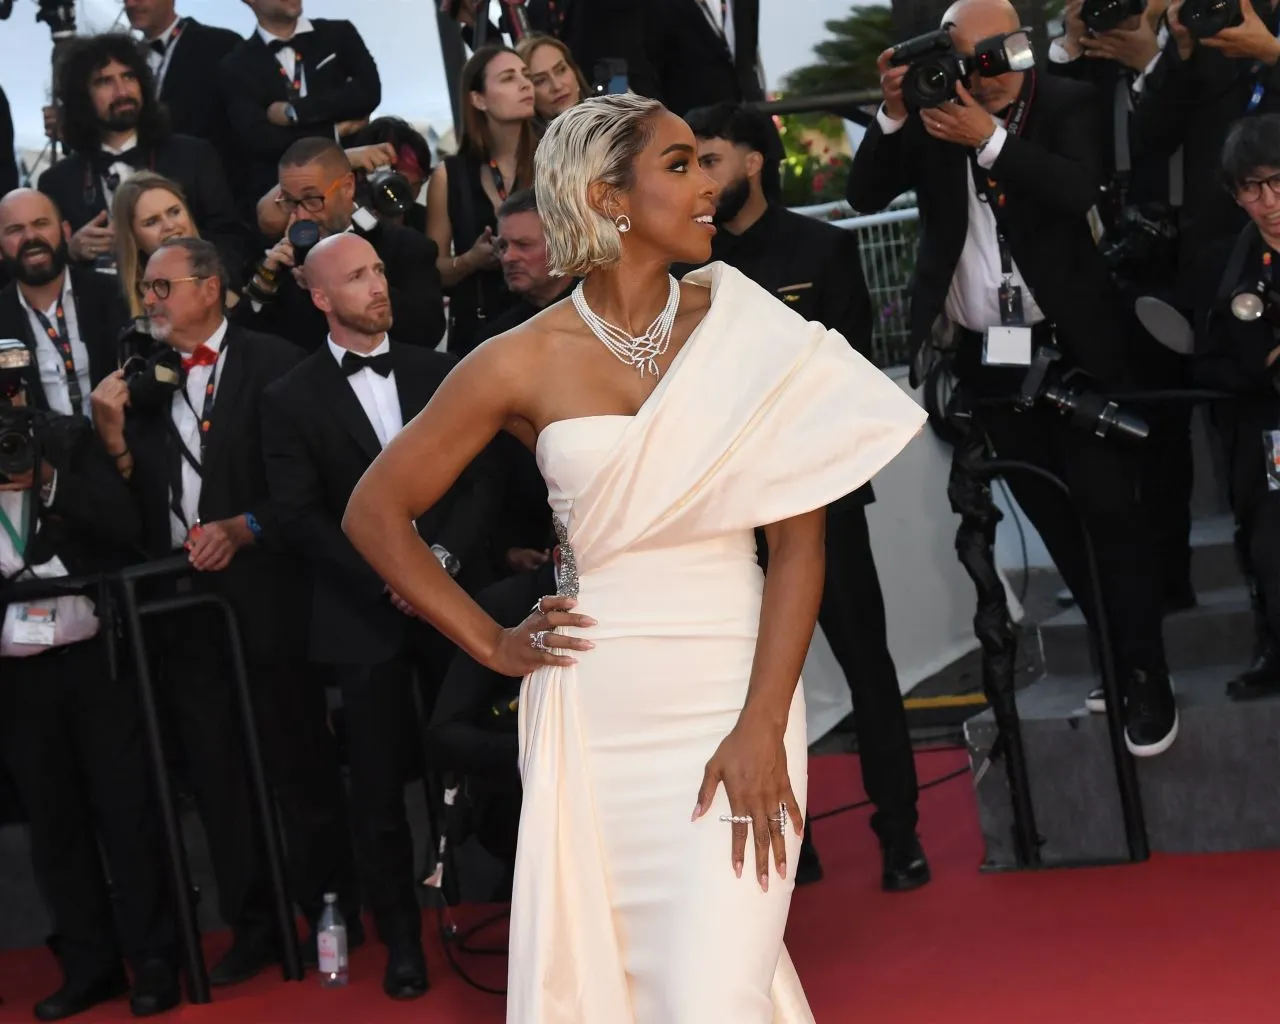 KELLY ROWLAND AT THE COUNT OF MONTE CRISTO PREMIERE AT CANNES FILM FESTIVAL3